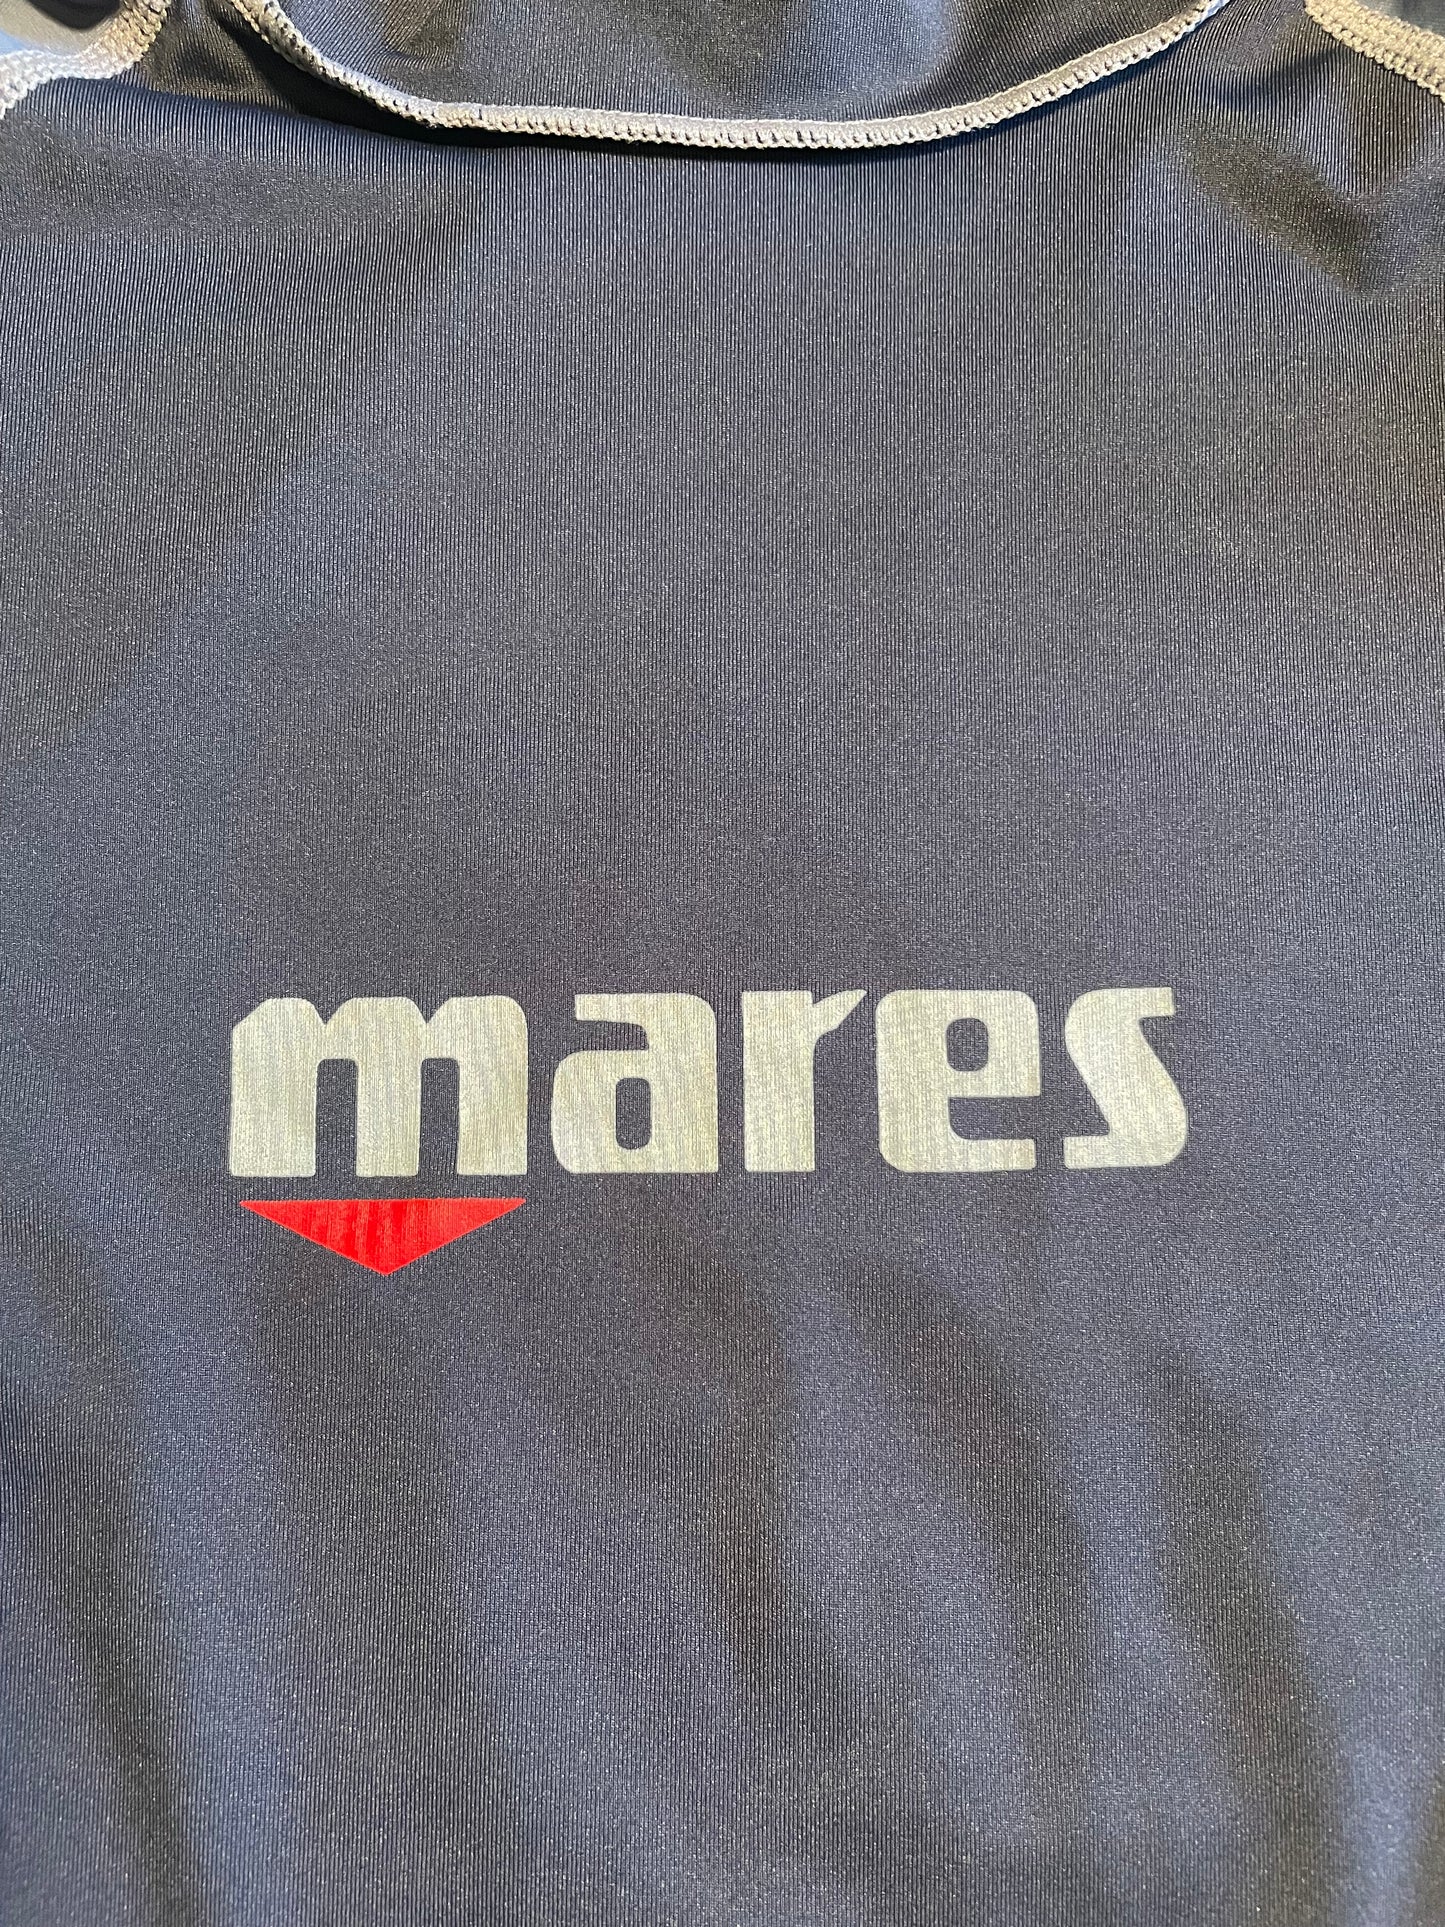 Mares Cycling Shirt (very good) Adults XSmall. Height 23 inches